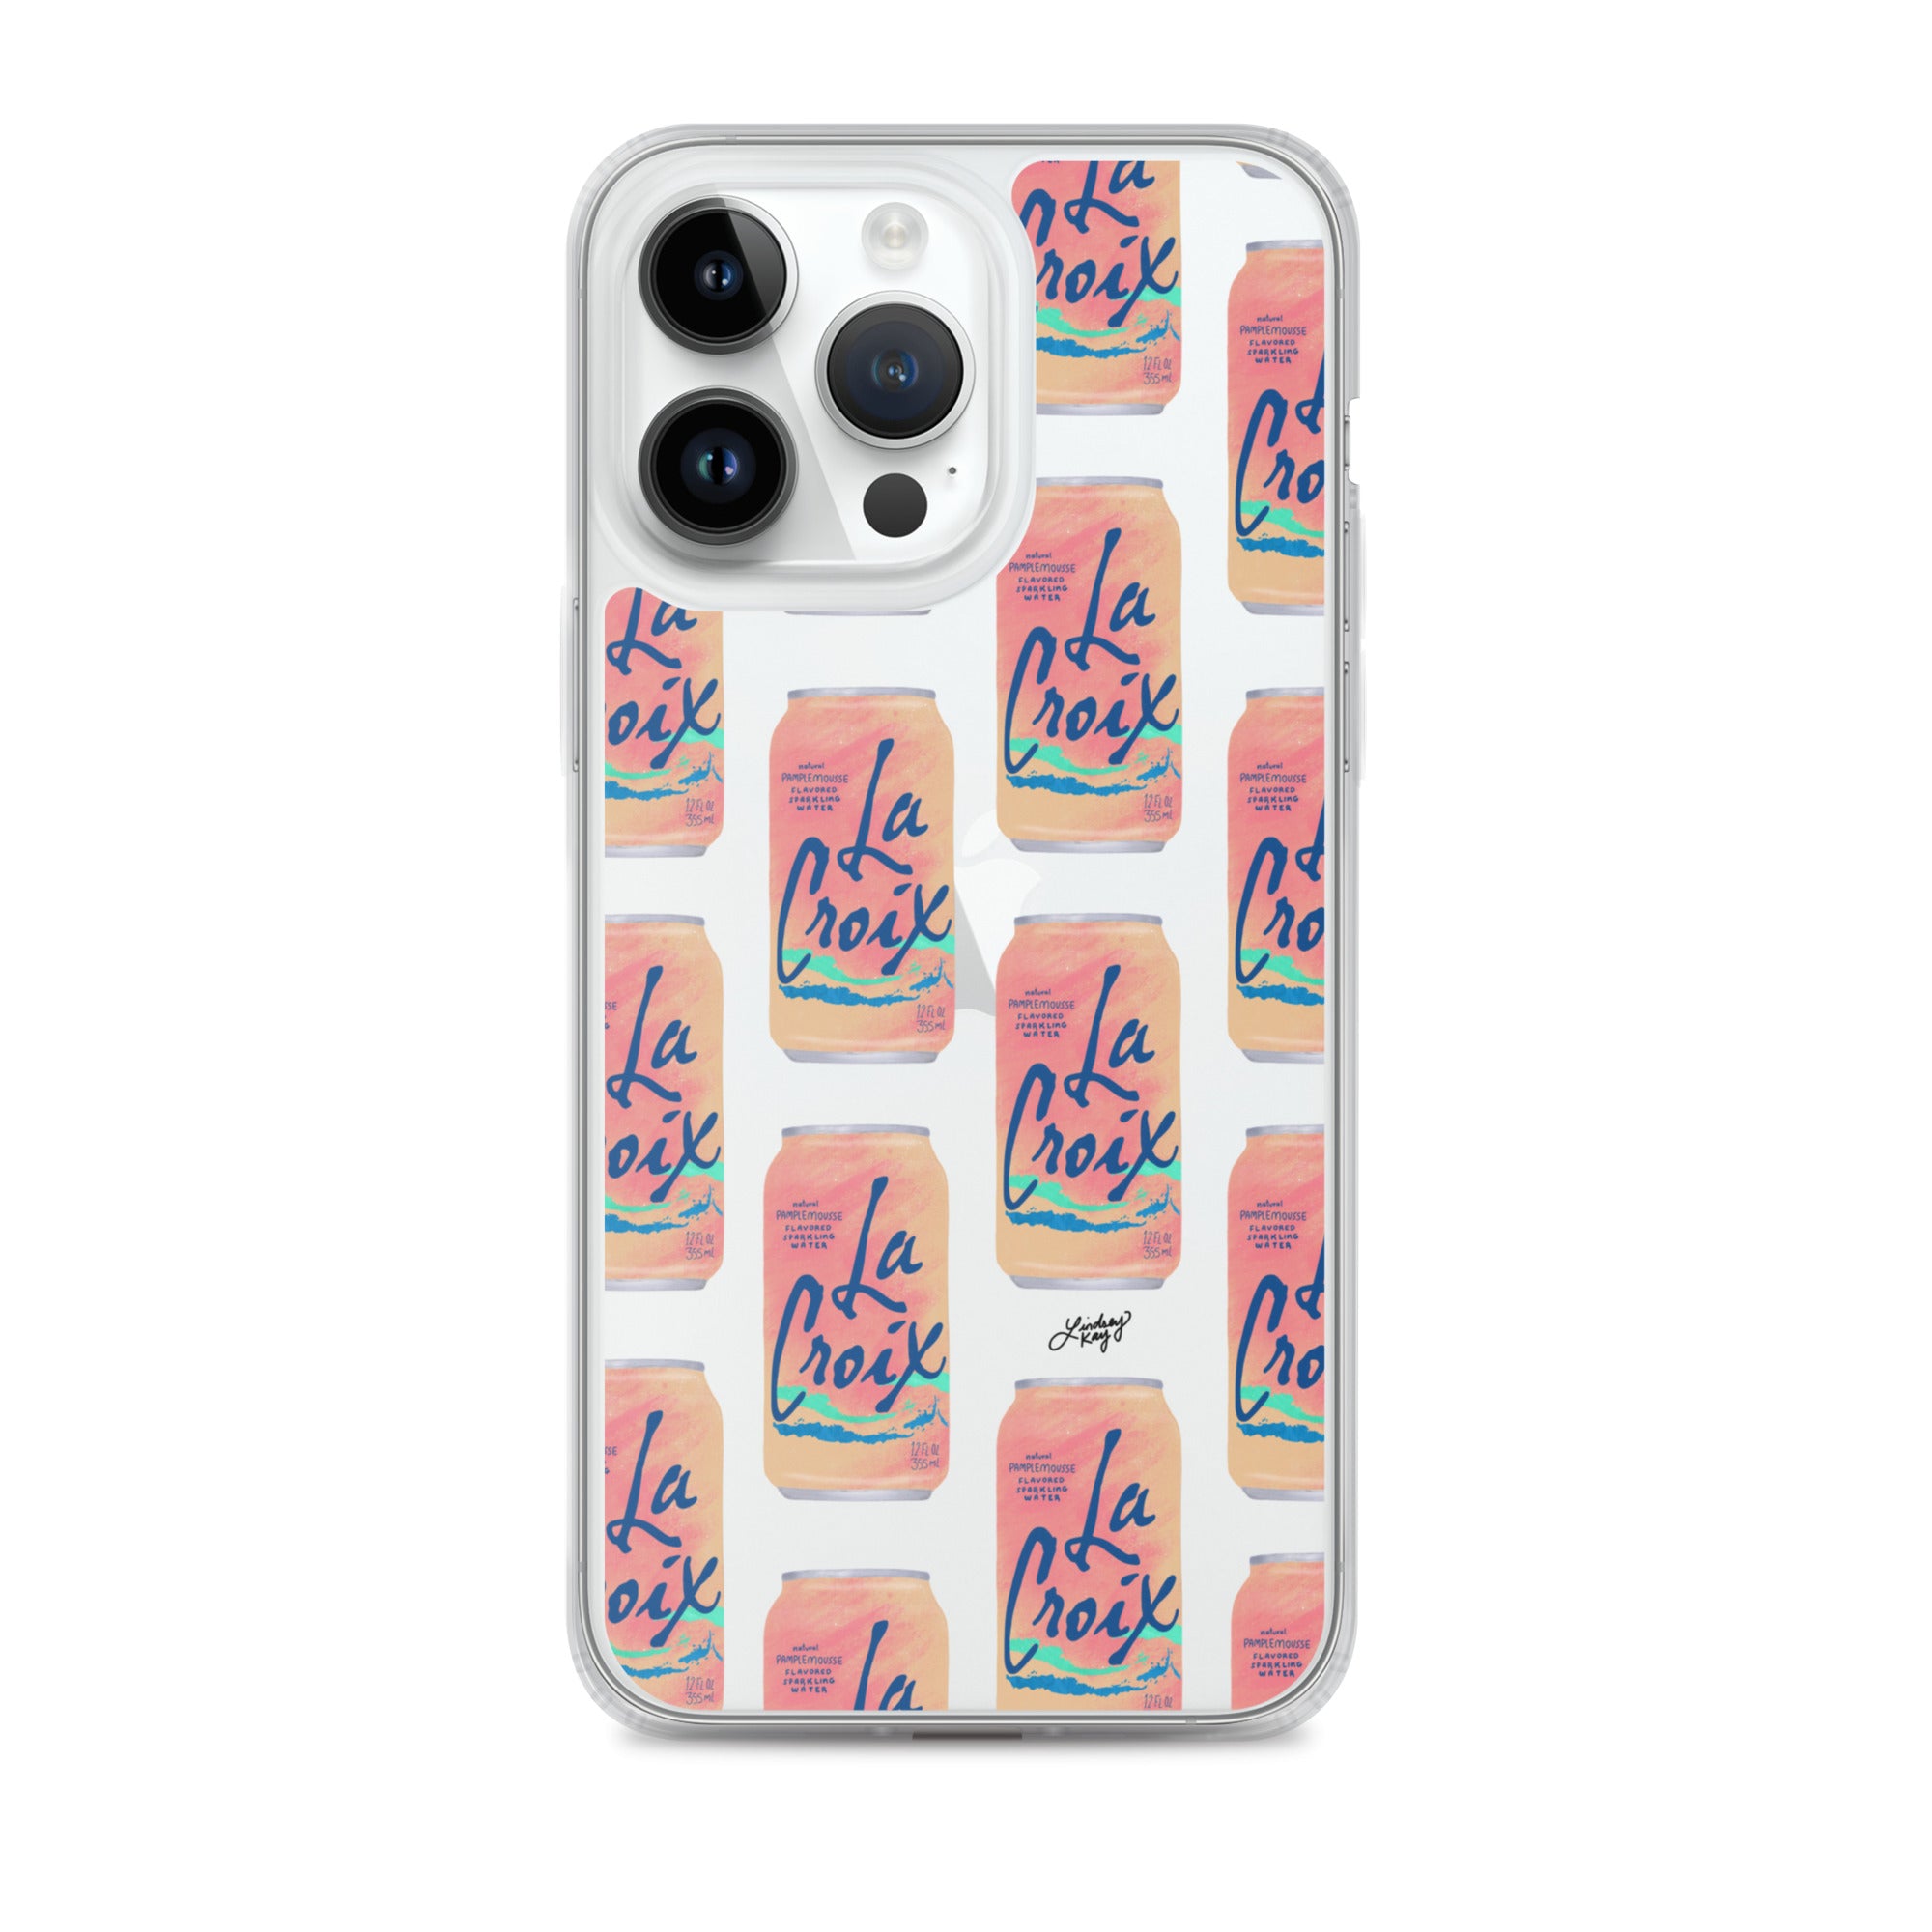 Pamplemousse la croix design pattern illustration trendy water summer pattern iPhone phone case cover clear mobile accessories Lindsey Kay collective 